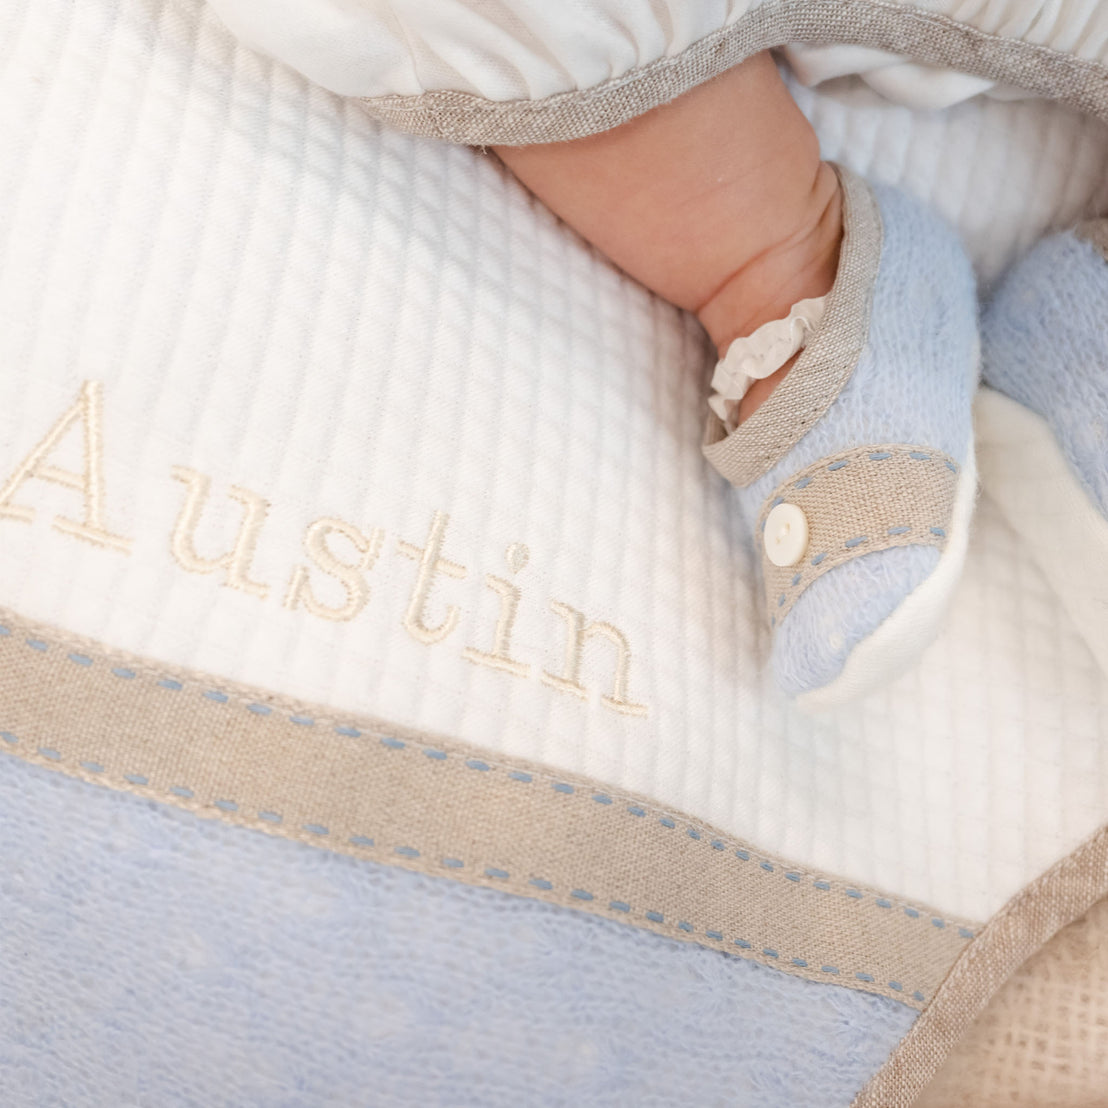 A close-up of a white and blue Austin Personalized Blanket with the name "Austin" embroidered in a delicate script, resting in a woven basket. A baby foot wearing baby booties is in the upper right corner.